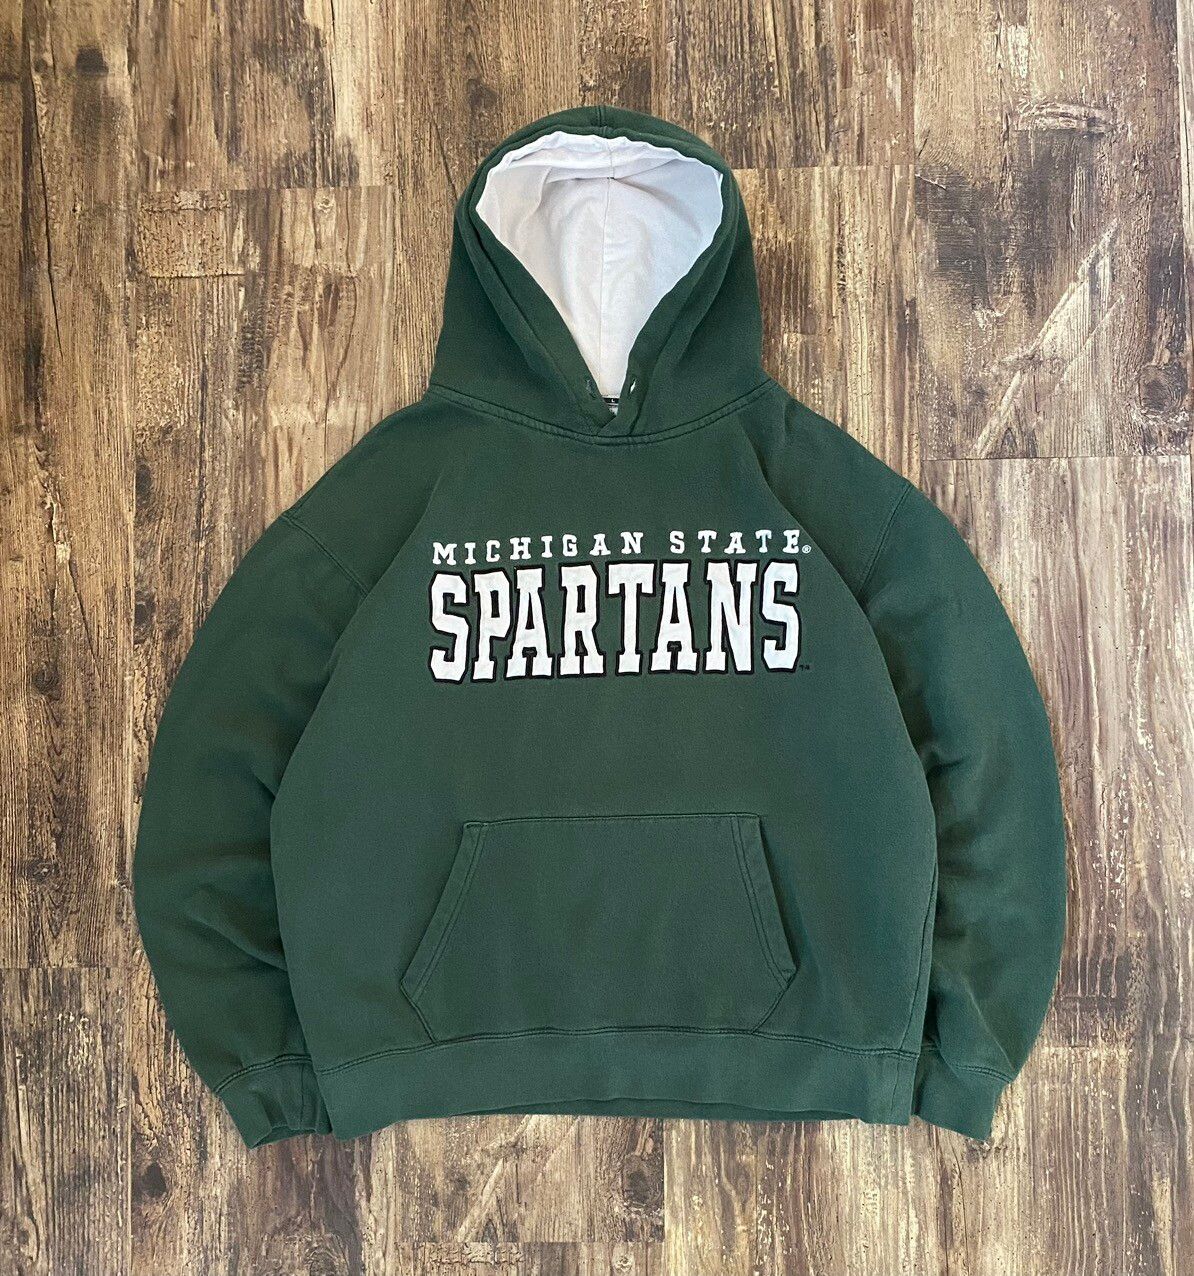 Vintage Y2K 2000s Faded Michigan State Spartans Spellout Hoodie Size US S / EU 44-46 / 1 - 1 Preview